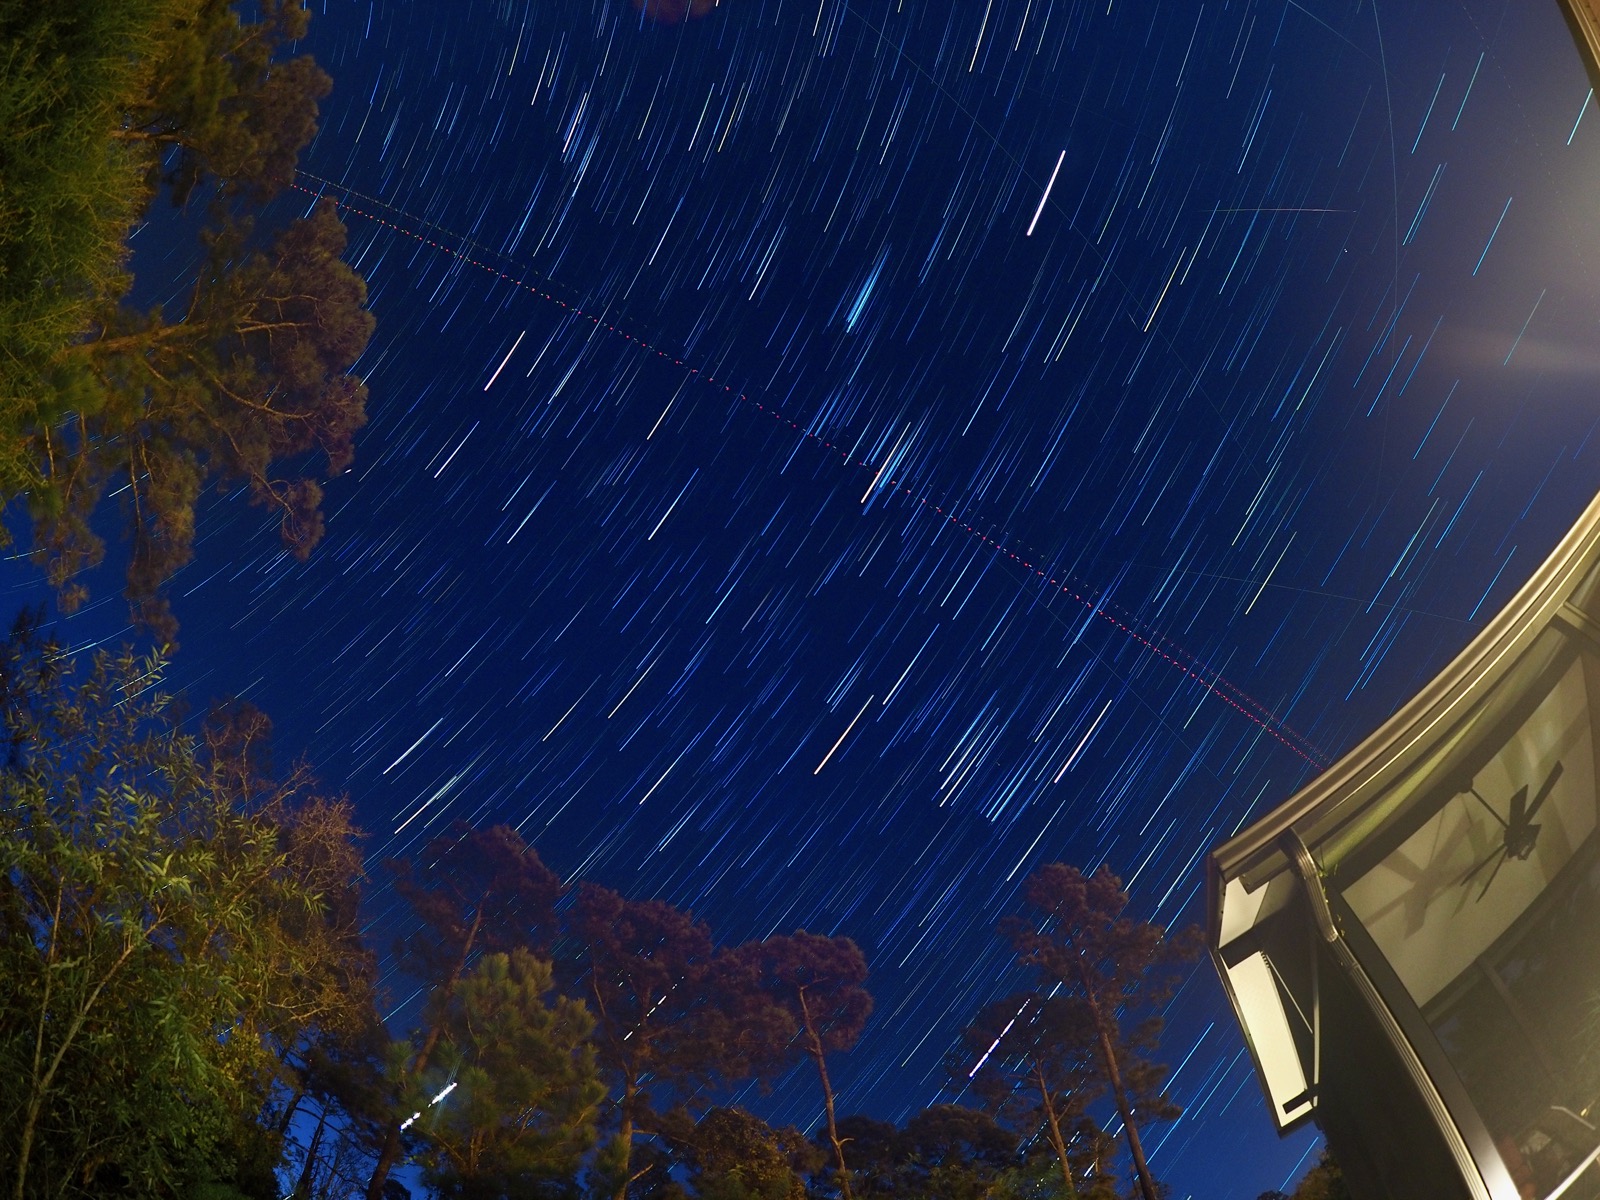 Star trails visible overhead along with aircraft lights, satellites and possibly a meteor